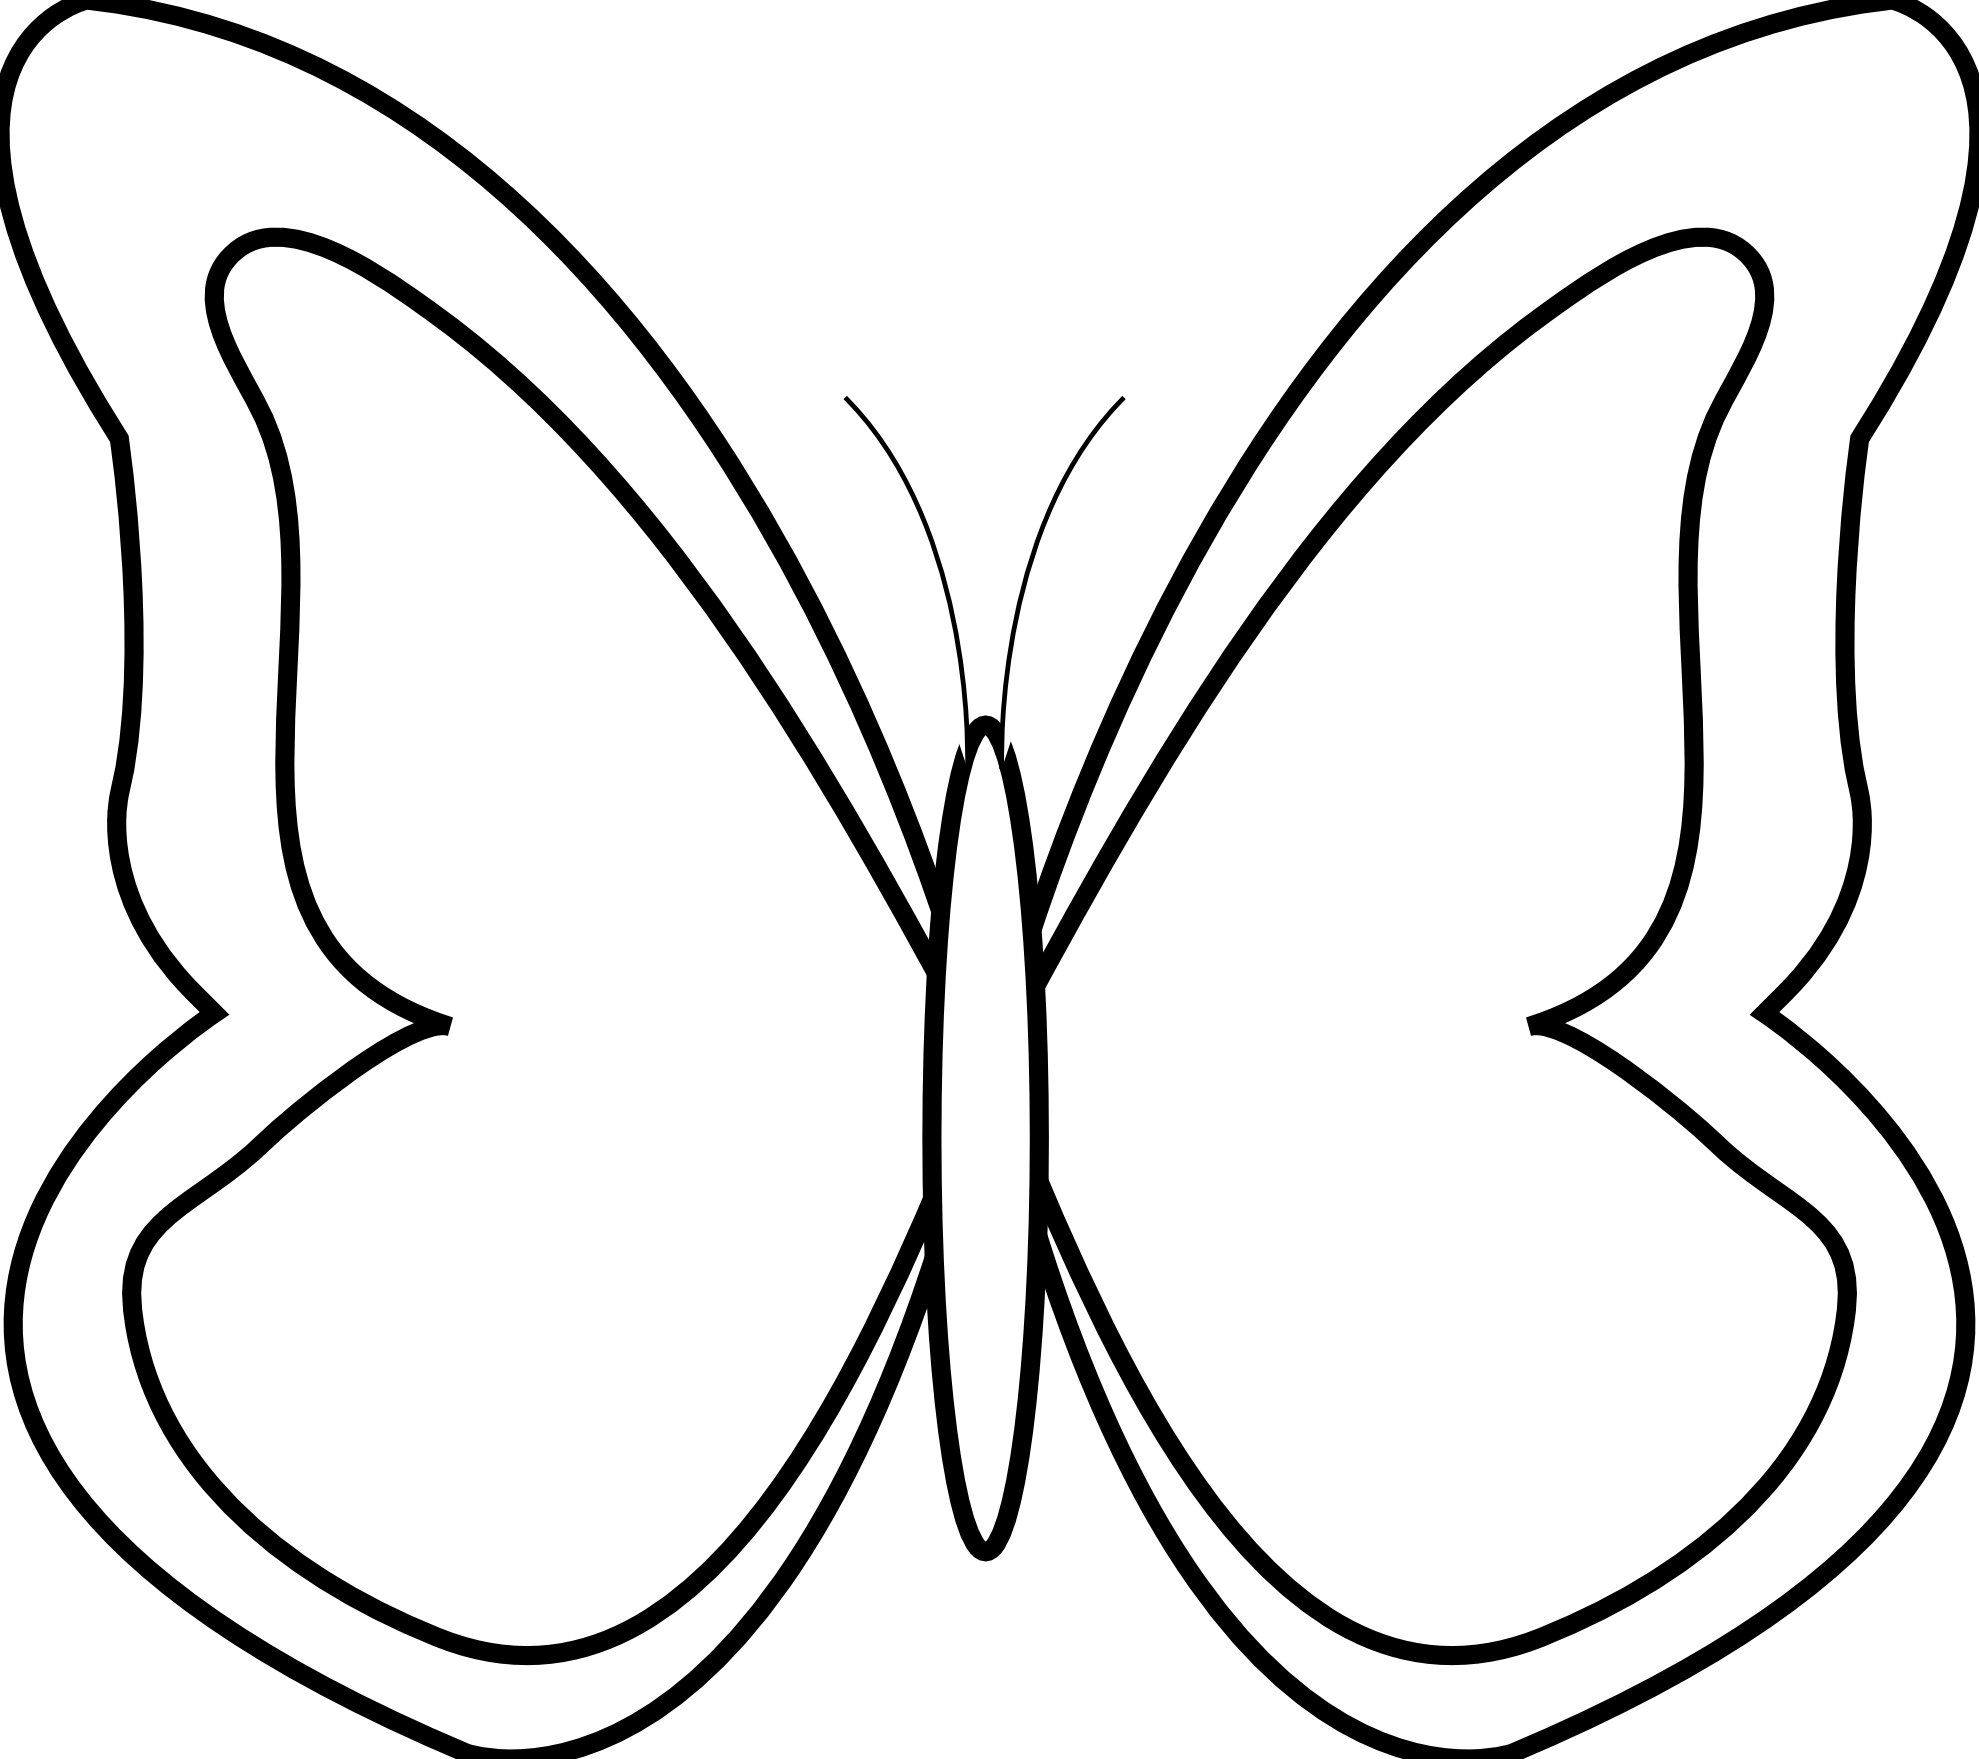 Black And White Butterfly Clip Art